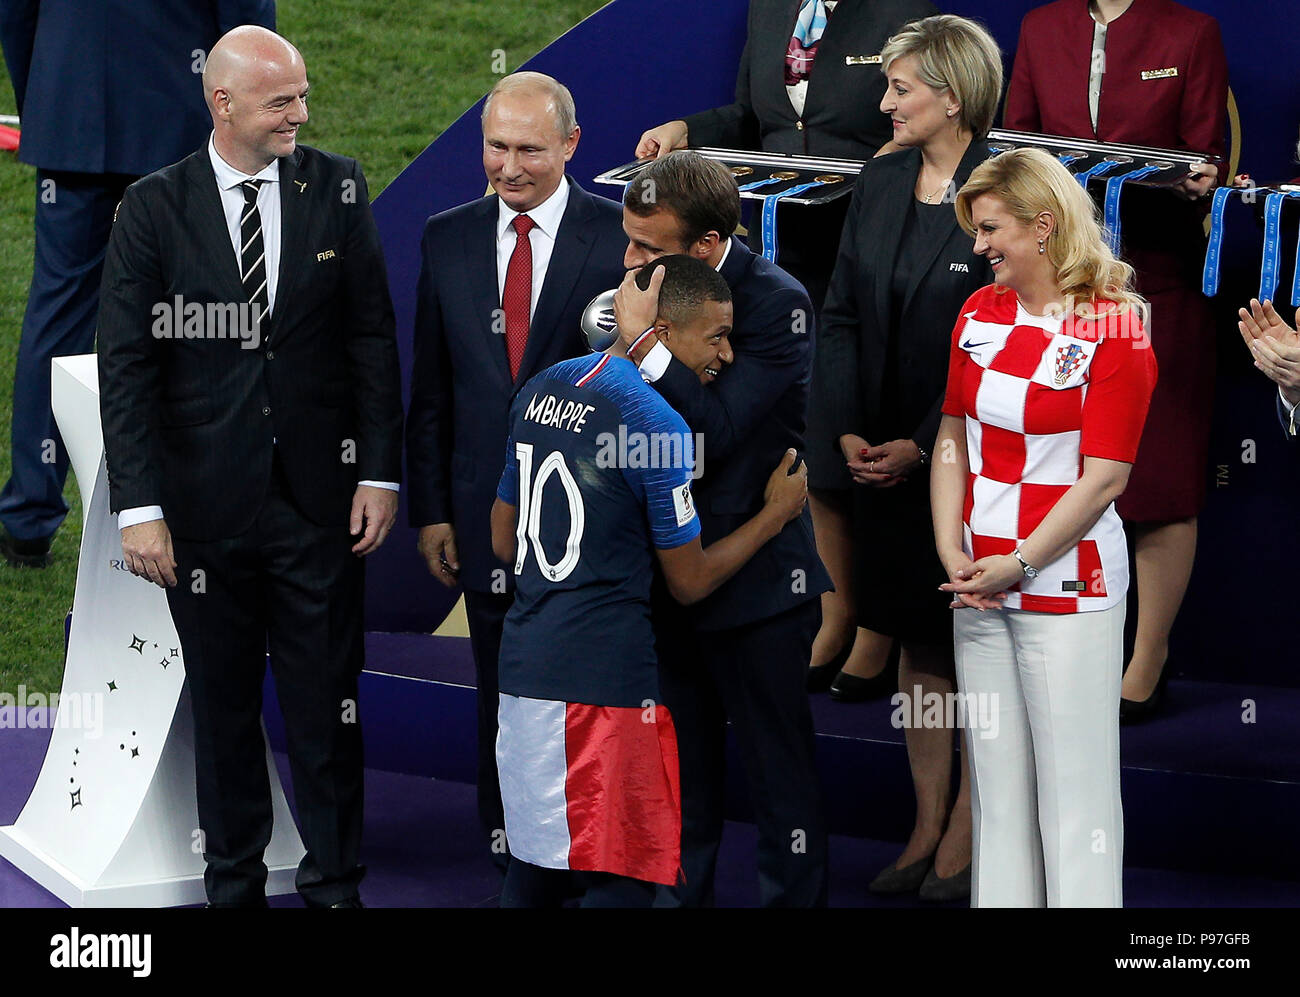 Moscow, Russia. 15th July 2018. Emmanuel Macron embraces Kylian MBAPPE from France in front of FIFA President Gianni Infantino, Russian President Vladimir Putin and Croatia&#3President ent Kolinda Grabar-Kitarovic during a match between France and Croatia valid for the 2018 World Cup final held at the Luzhniki Stadium in Moscow, Russia. (Photo: Rodolfo Buhrer/La Imagem/Fotoarena) Credit: Foto Arena LTDA/Alamy Live News Stock Photo